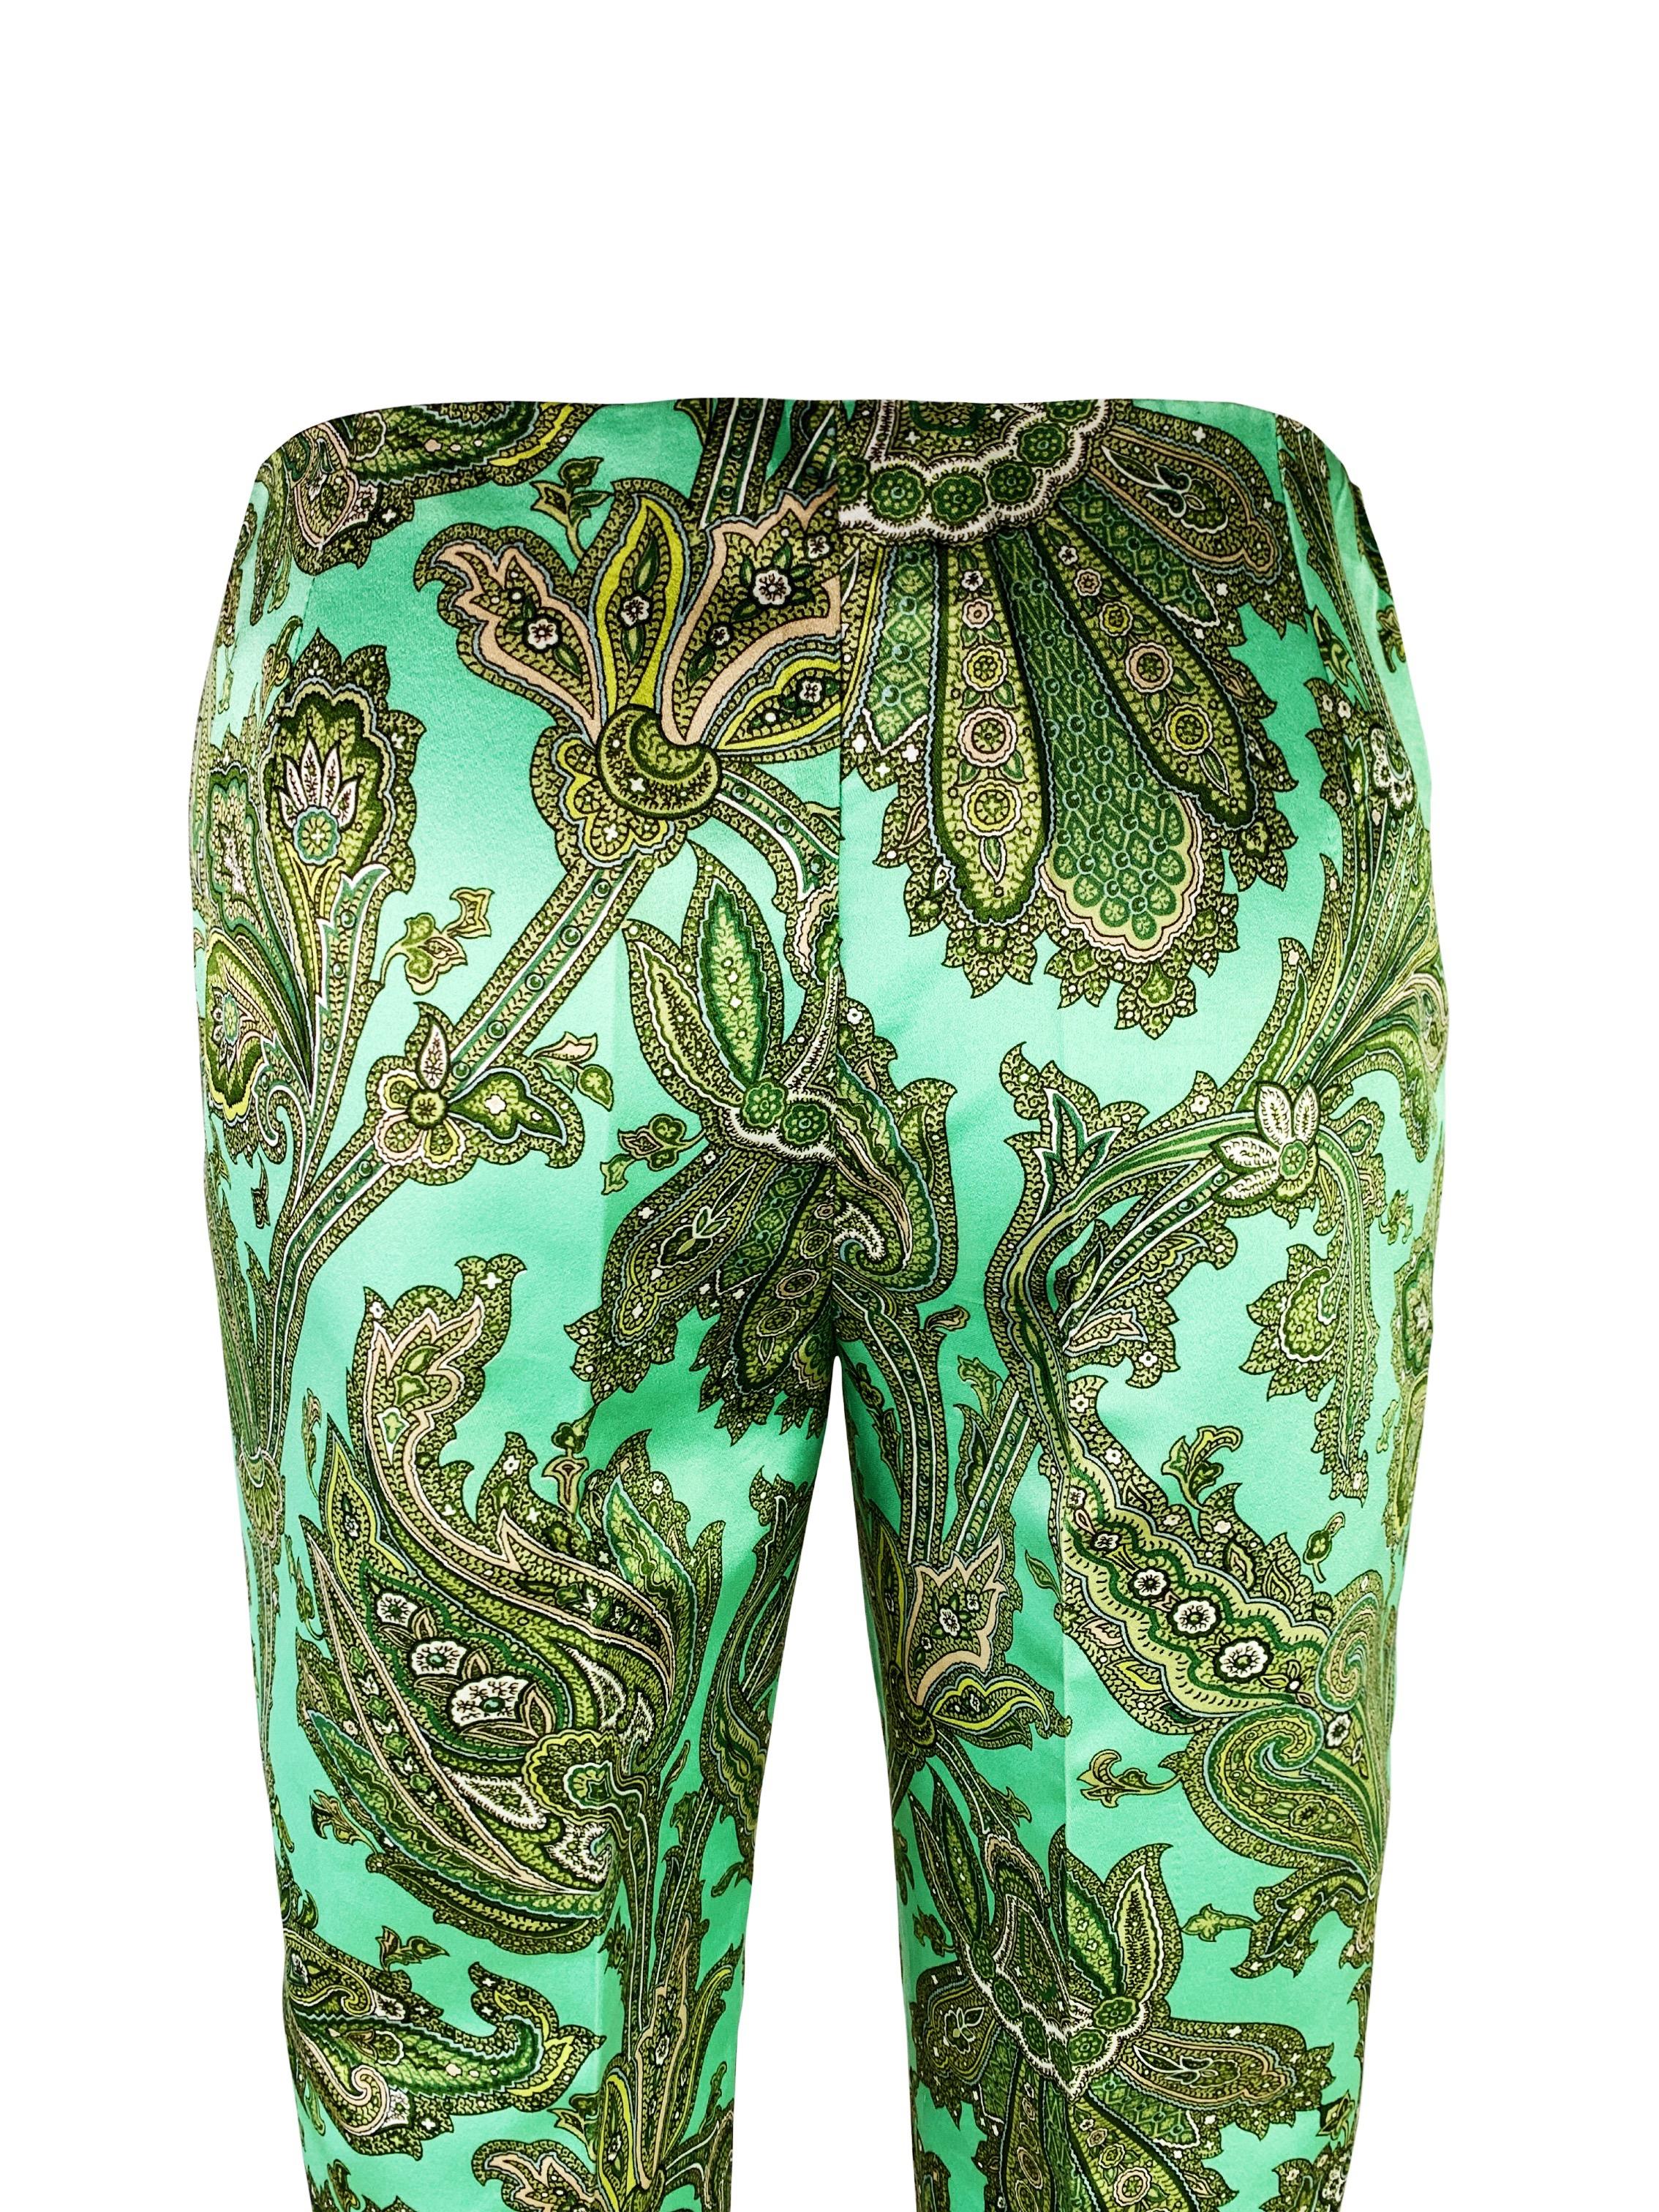 Dolce & Gabbana Spring 2000 Paisley Print Trousers In Good Condition For Sale In Prague, CZ